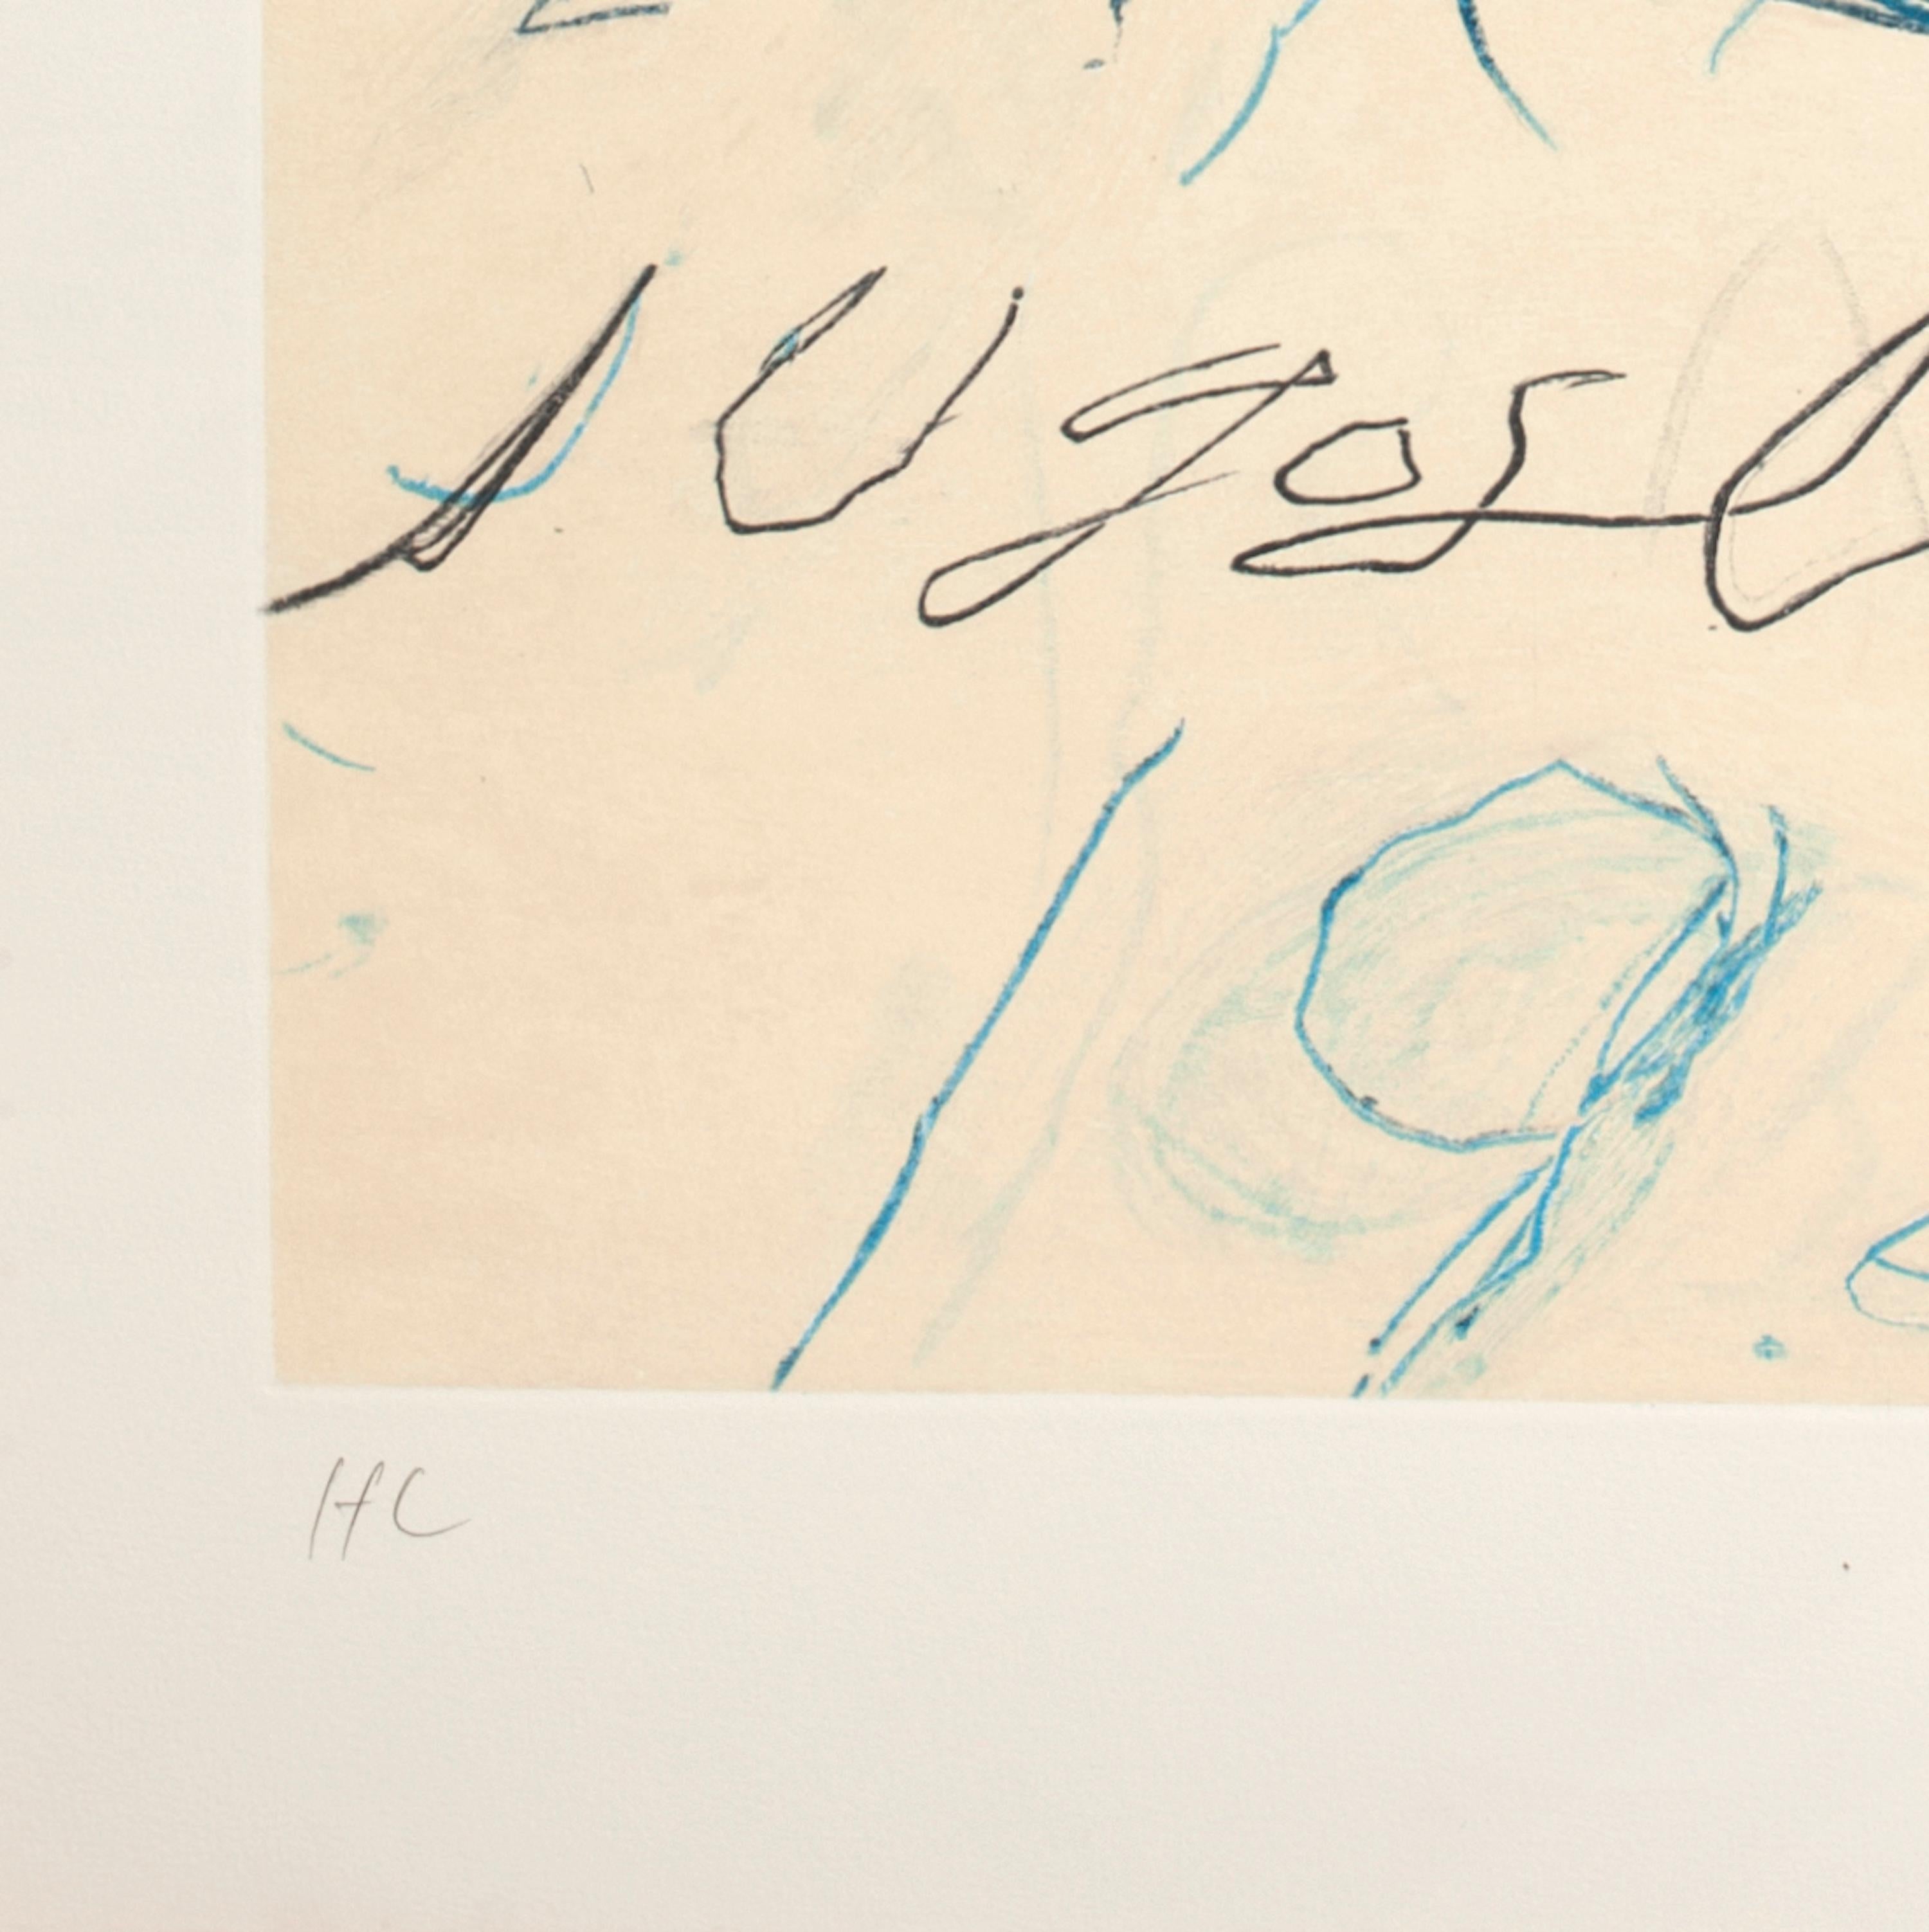 Untitled, Sarayevo Winter Olympic Games 1984, is an etching with aquatint and lithograph in colors realized by Cy Twombly on the occasion of the Winter Olympics Games 1984 in Sarajevo. Realized on White Arches Paper.
Image dimensions: 75.3x54.7